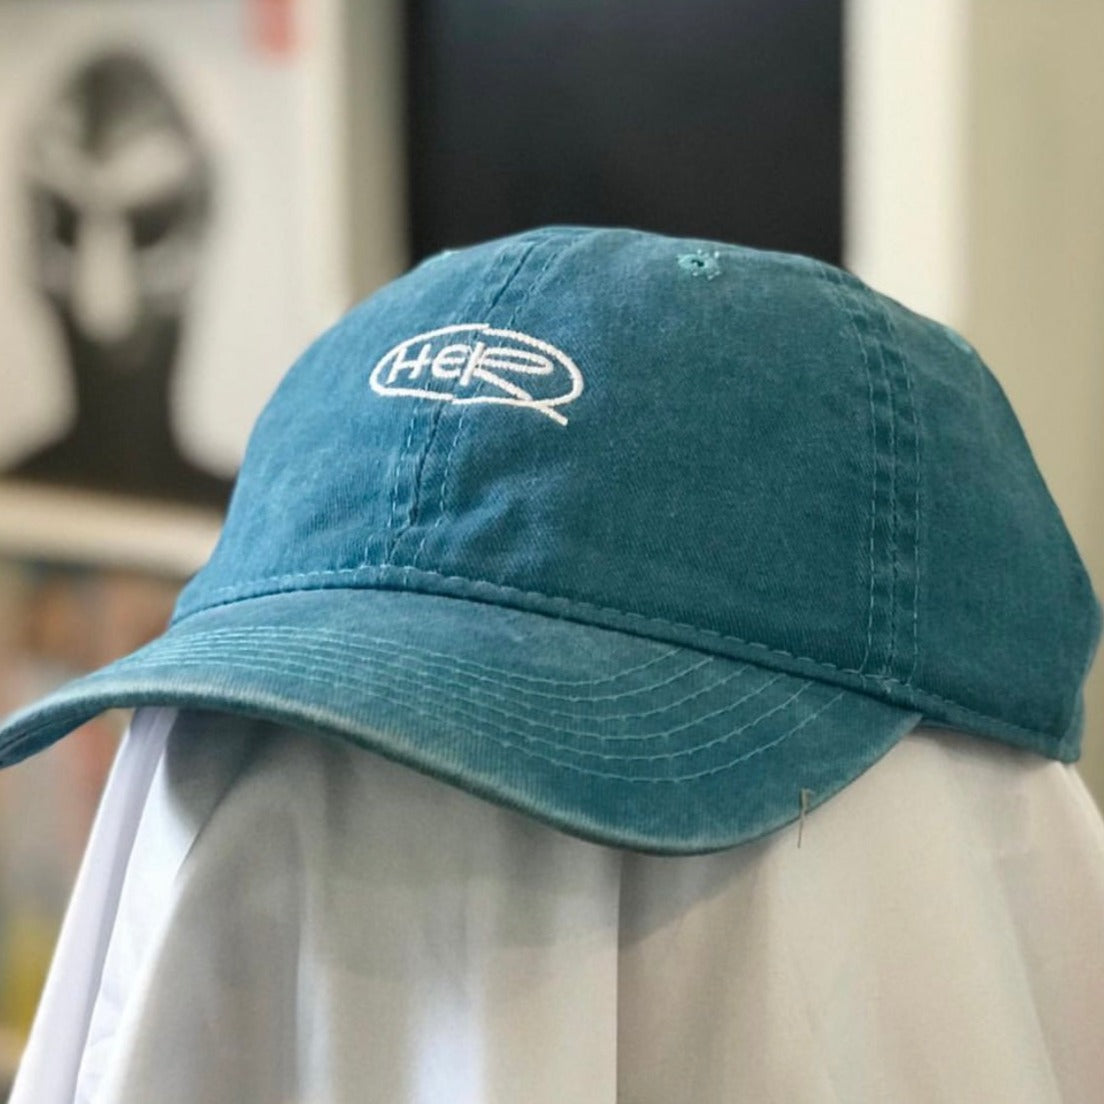 HER 他 - "HER 他" BABY BLUE HAT